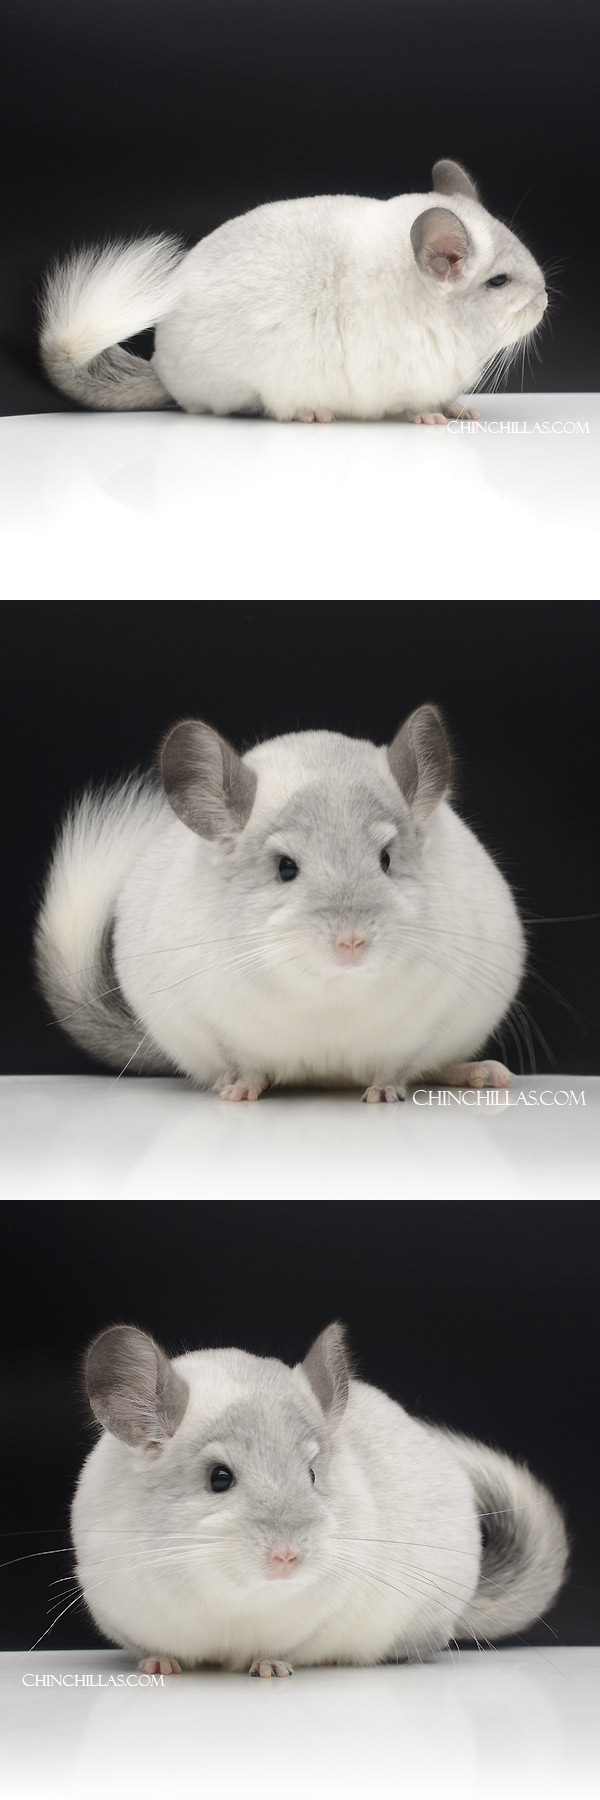 Chinchilla or related item offered for sale or export on Chinchillas.com - 000023 White Mosaic ( Royal Persian Angora & Violet Carrier ) Female Chinchilla